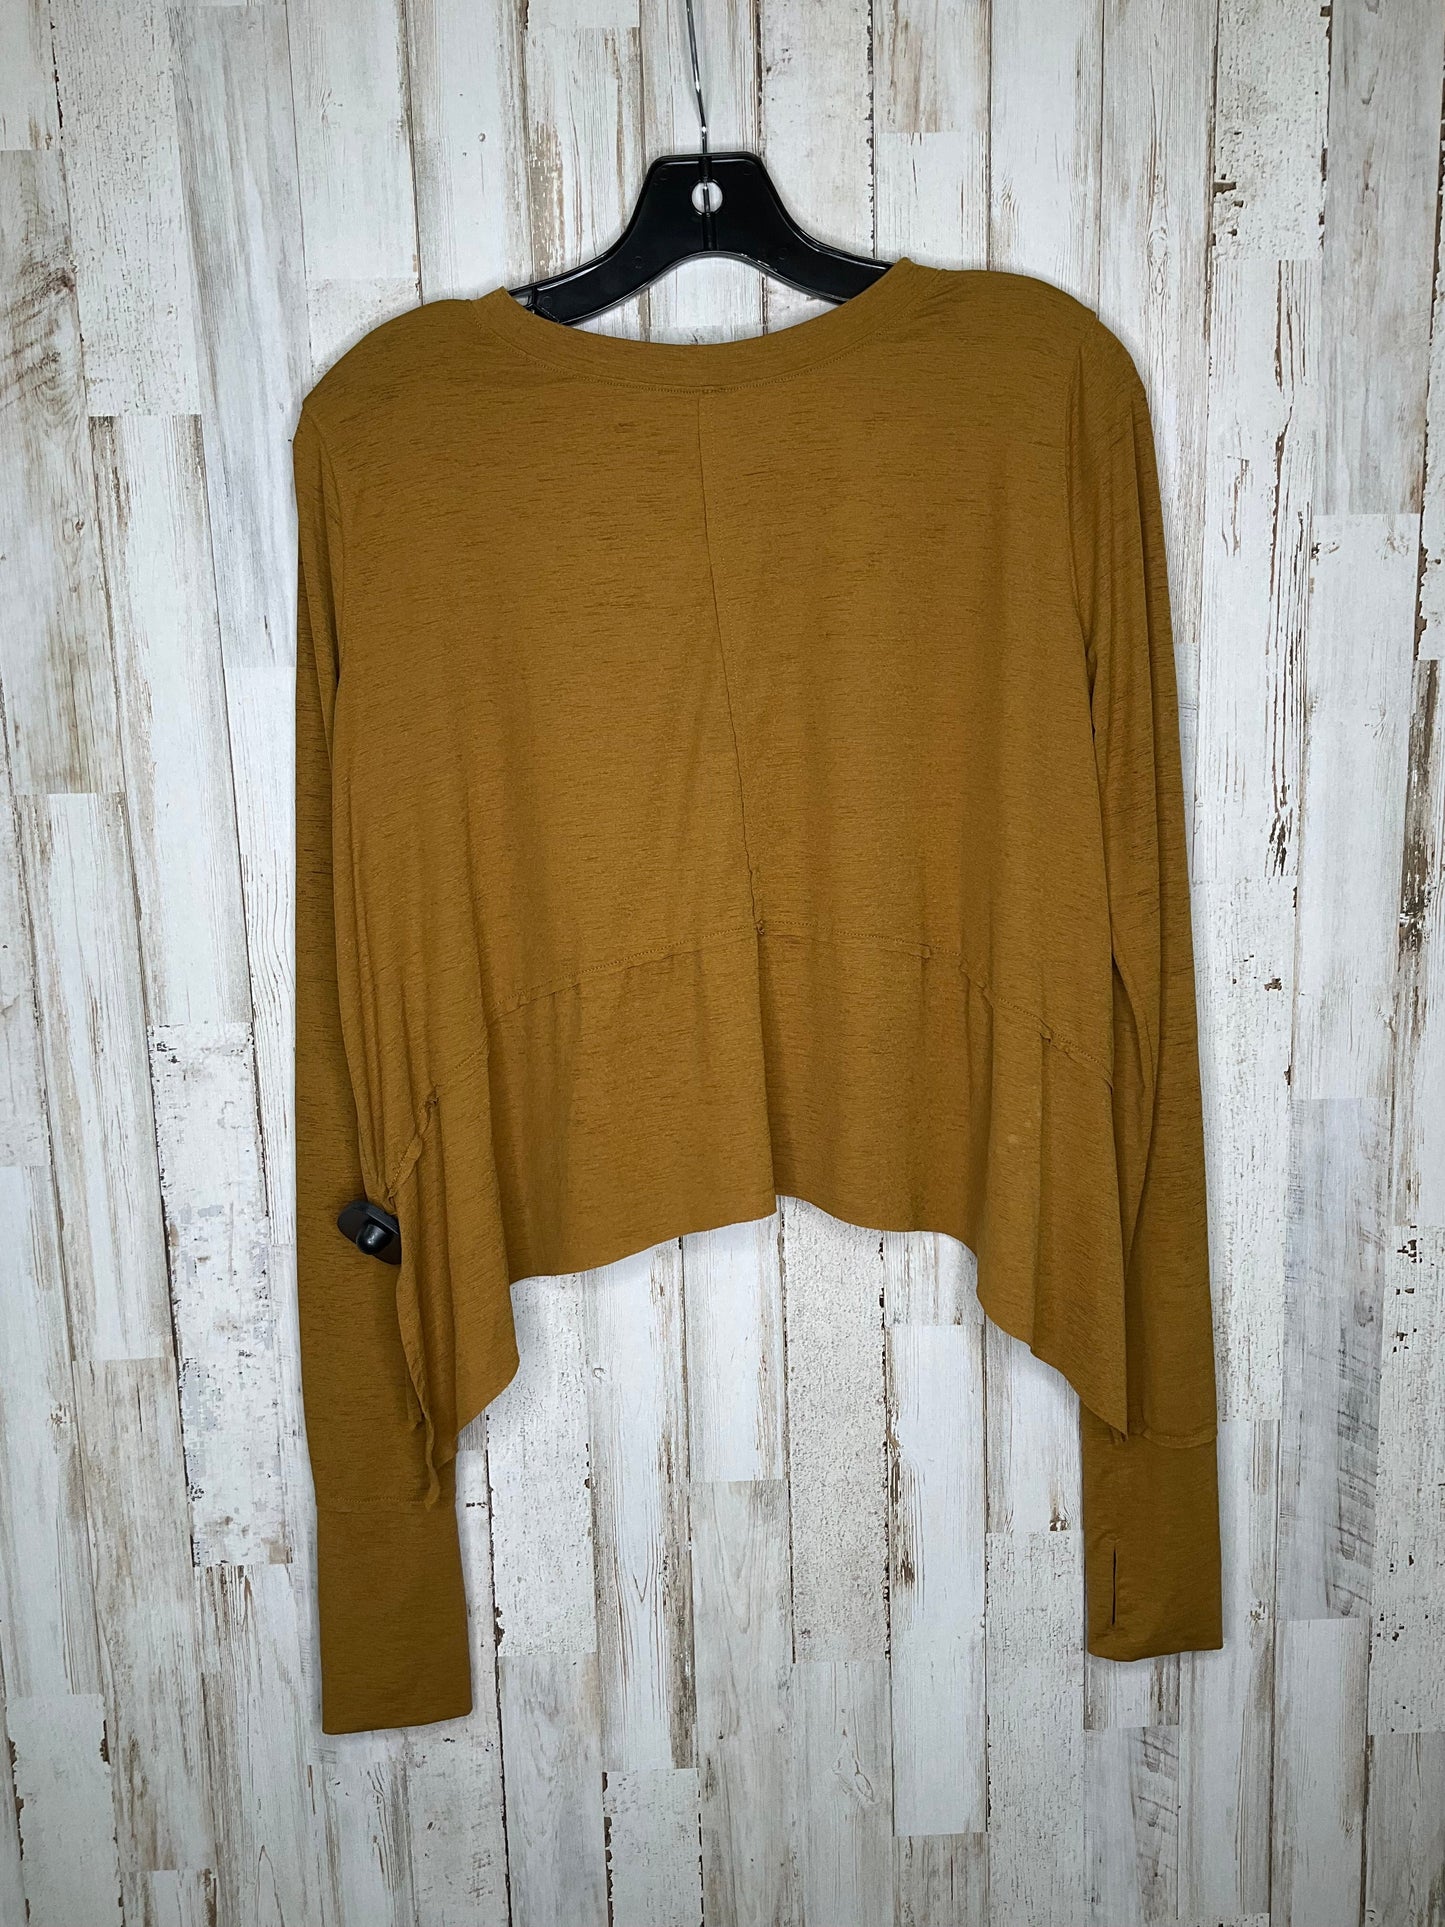 Brown Athletic Top Long Sleeve Collar Free People, Size S